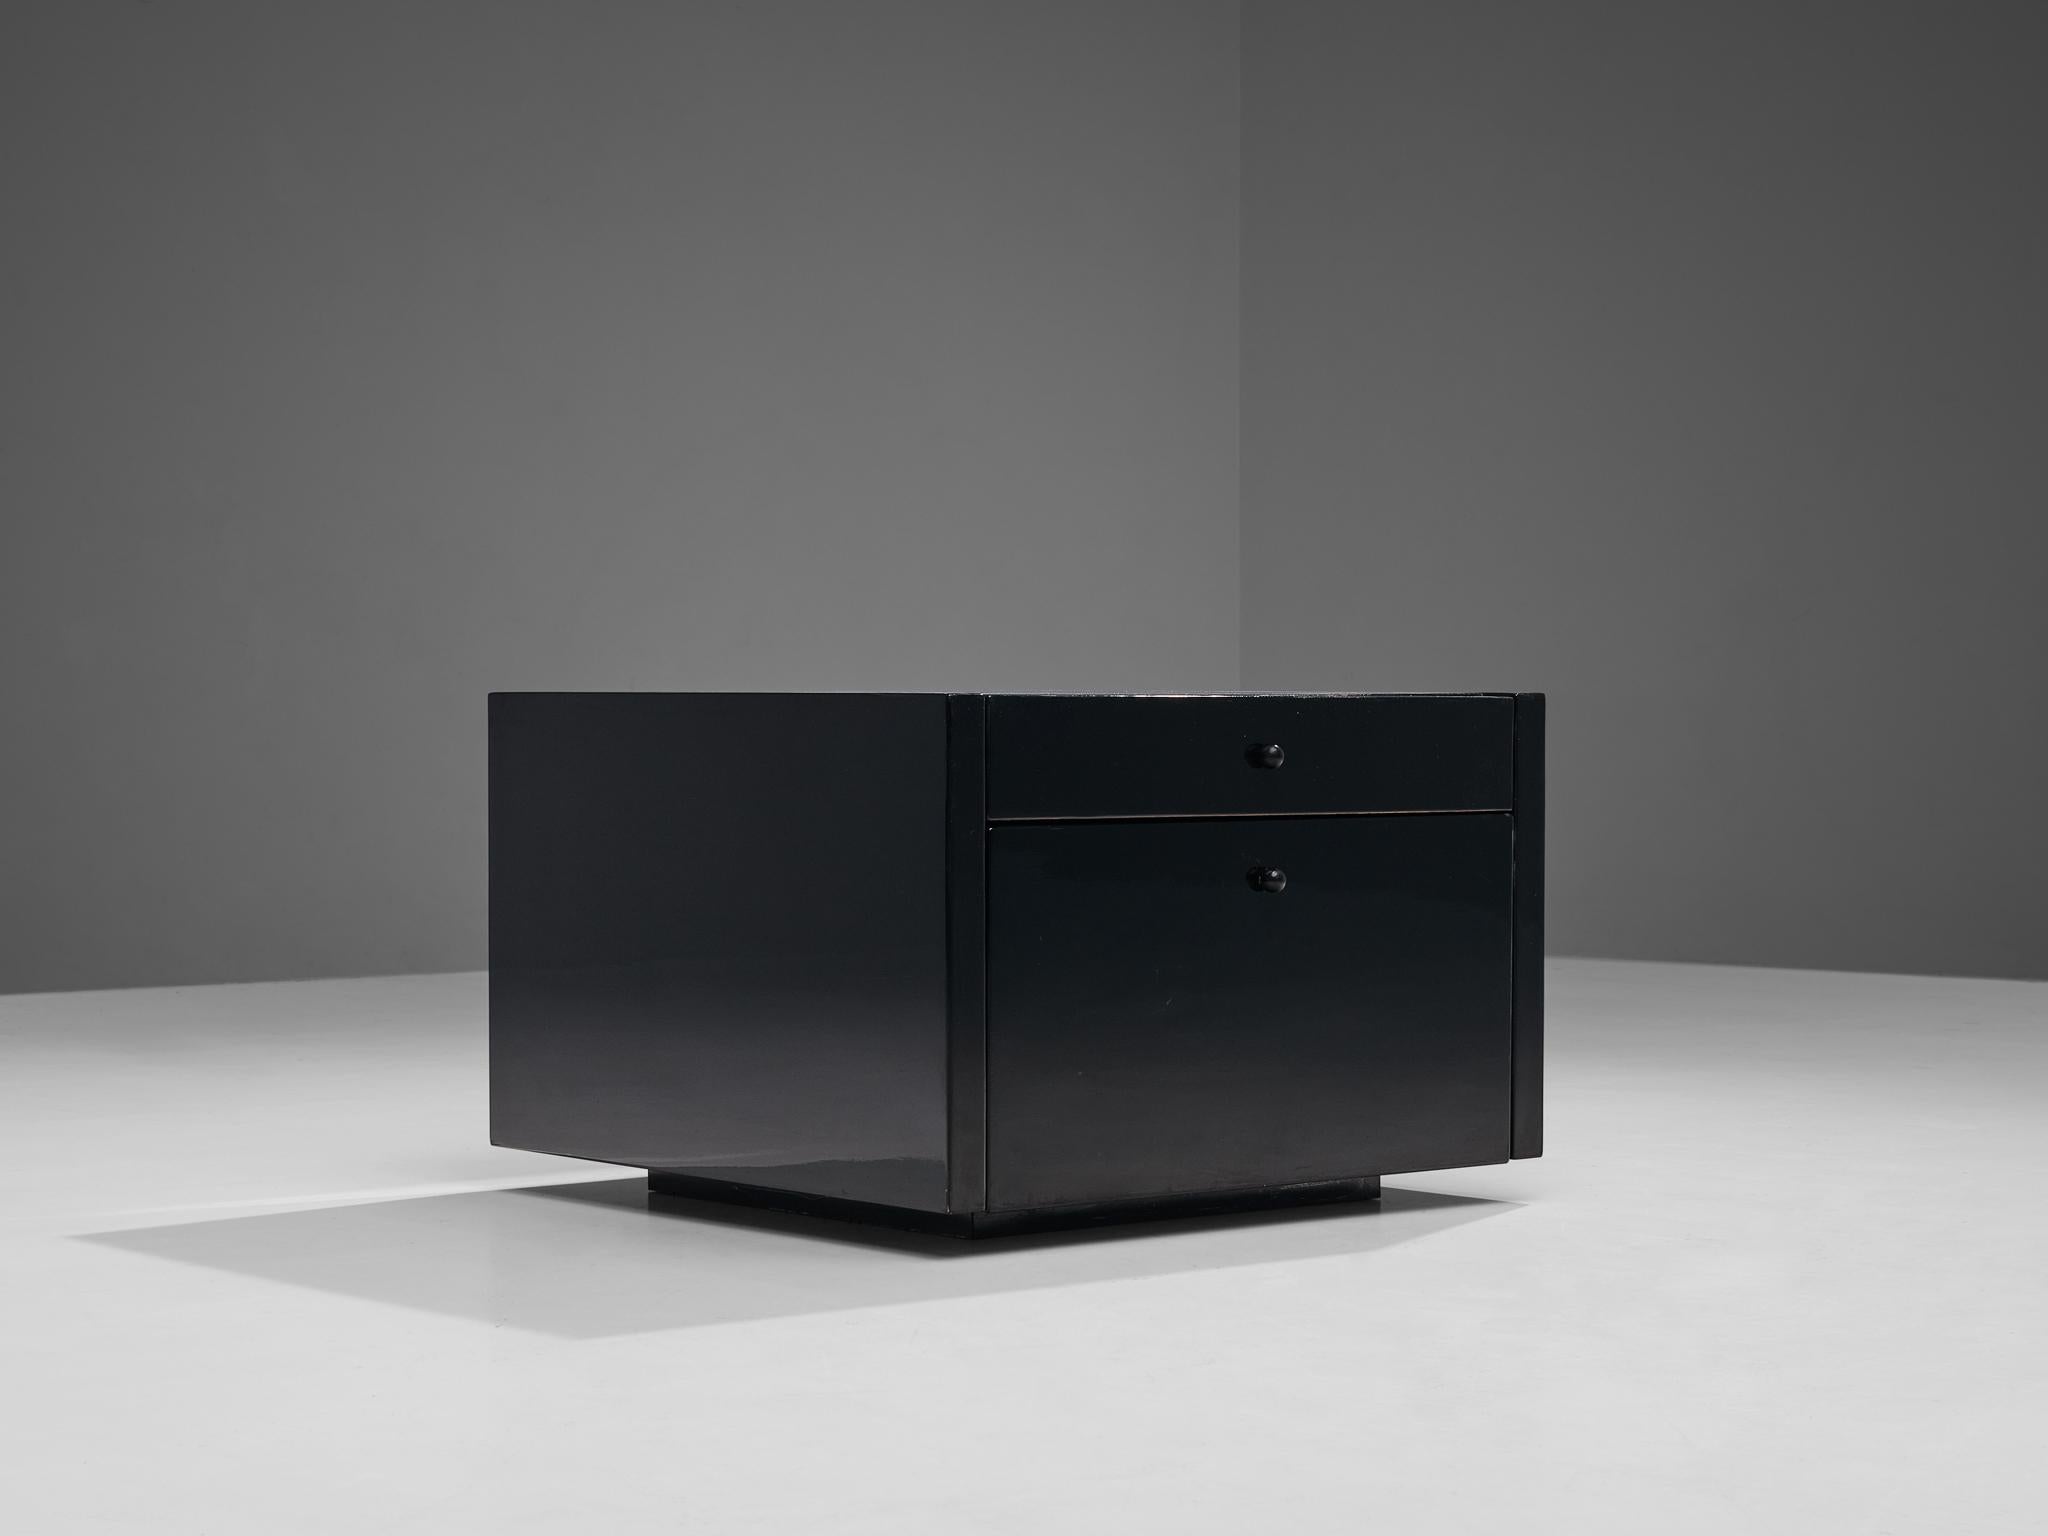 Massimo and Lella Vignelli for Poltronova, cabinet, 'Saratoga' line, black lacquered wood, Italy, 1964. 

This cabinet is part of the Sartoga' series designed by Italian designer couple Lella & Massimo Vignelli. The Vignelli's were known for their